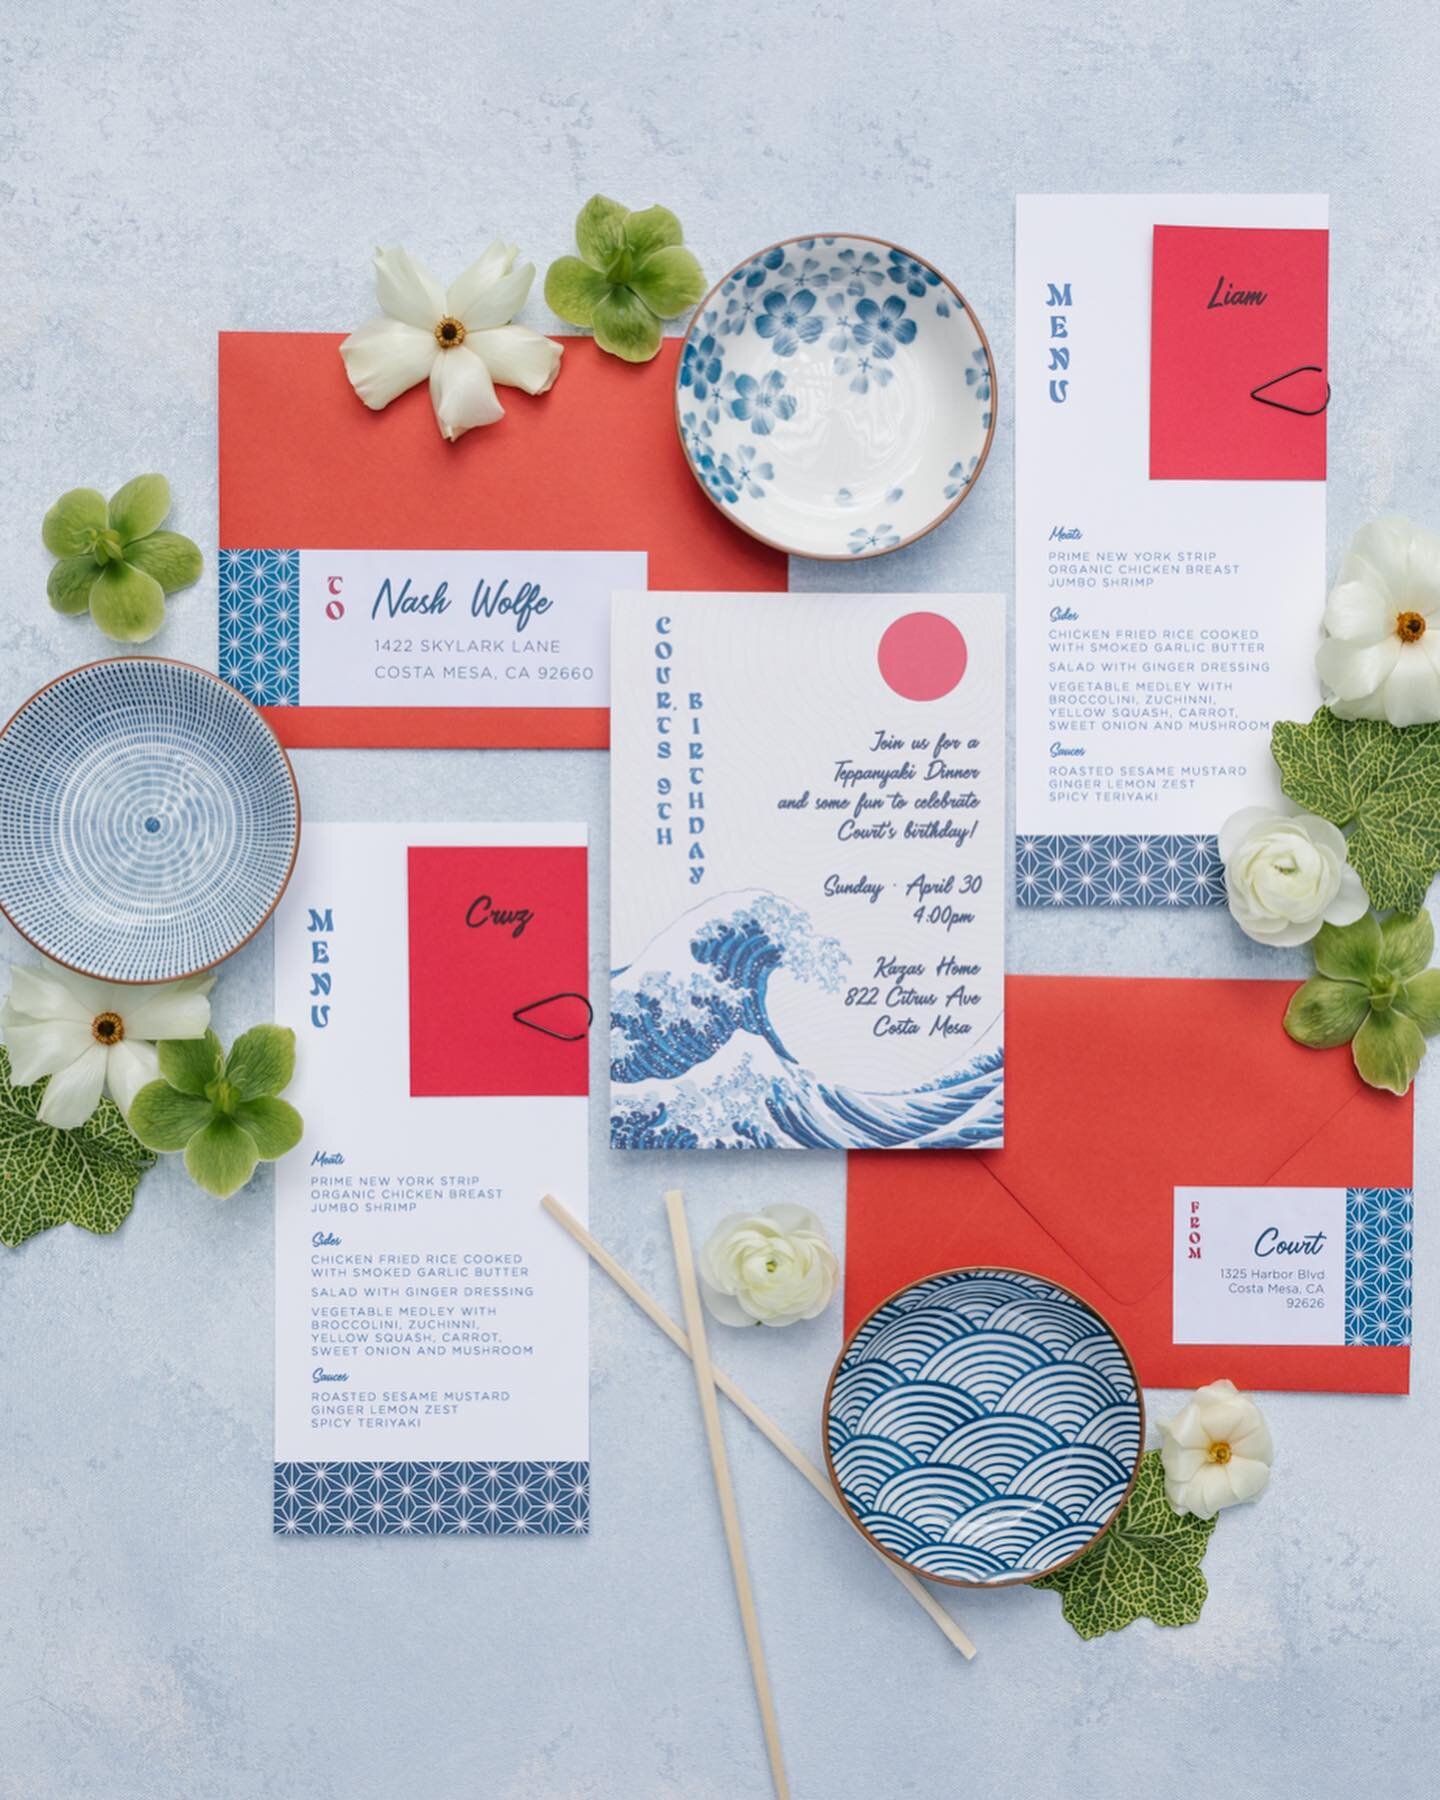 This Teppanyaki 9th birthday with @beijosevents is SO good! Bringing together beautiful Japanese prints and textures and mix in a bit of beach vibes, and you have yourself an awesome (and delicious) party! 🌊

Vendors - Design, Planning &amp; Mama -&